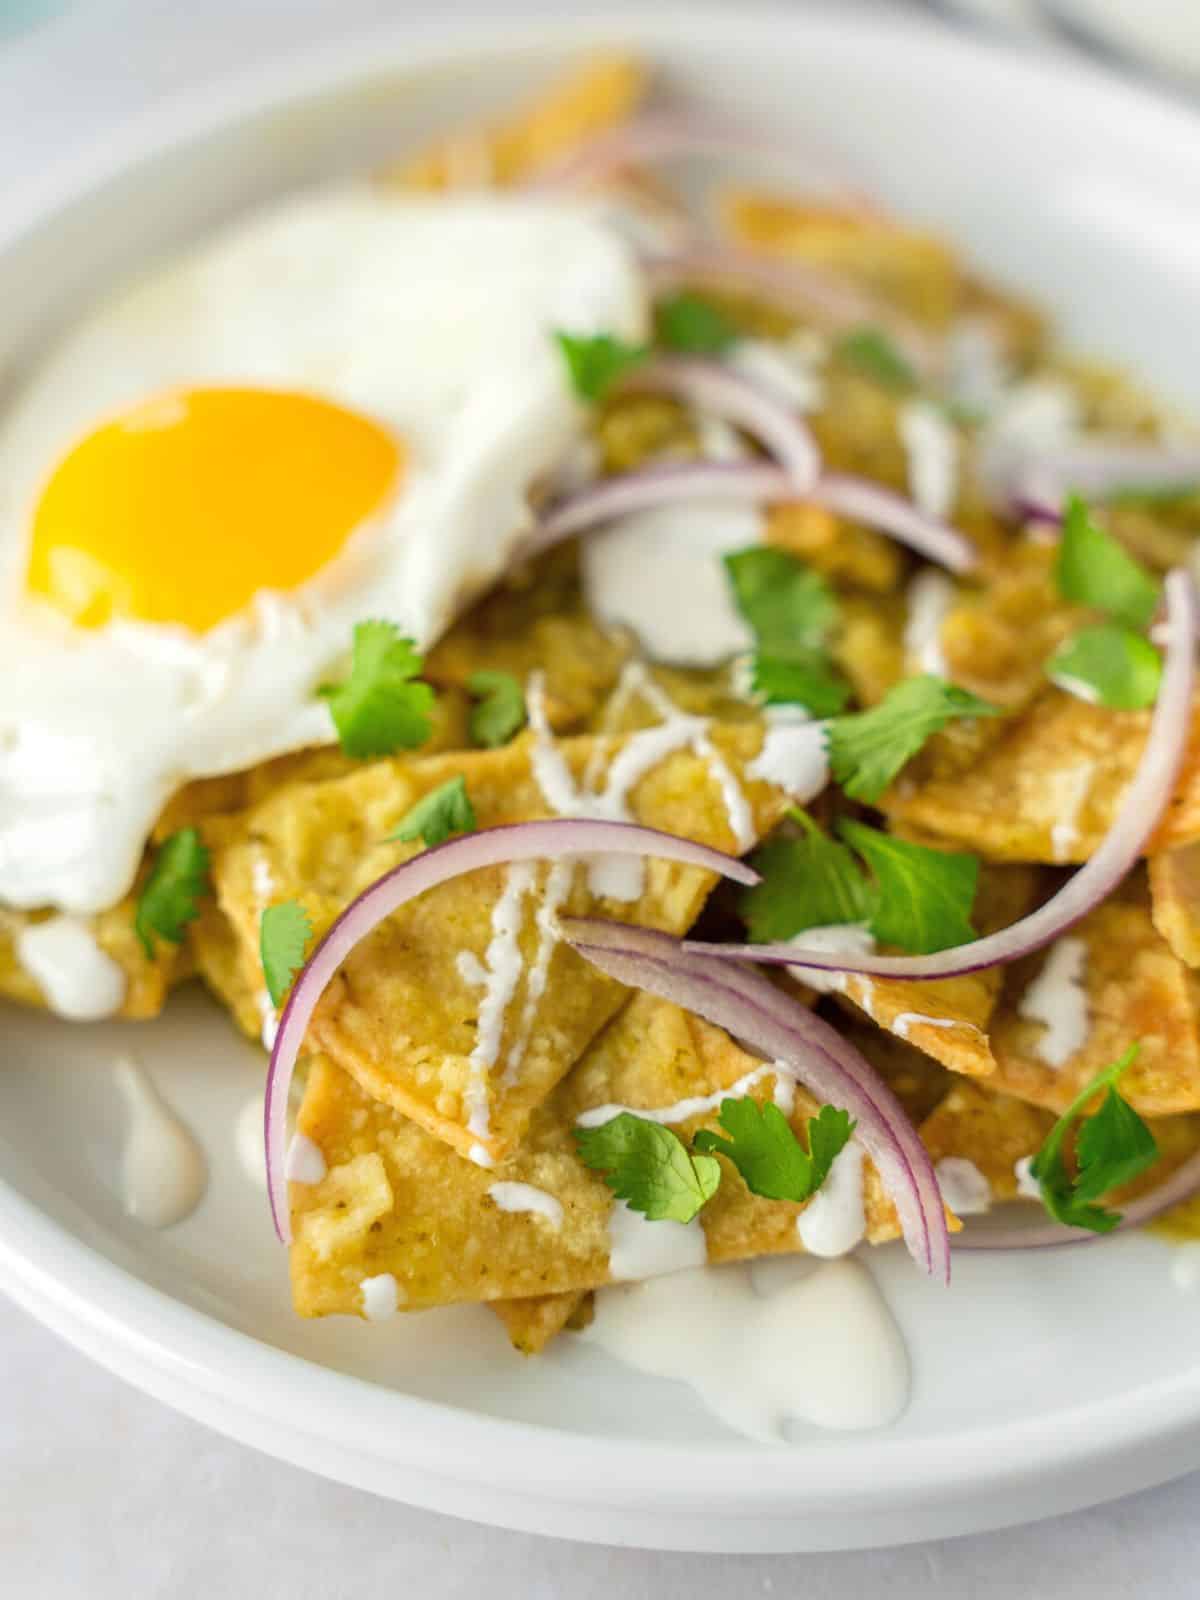 Chilaquiles verdes on a plate with a fried egg.